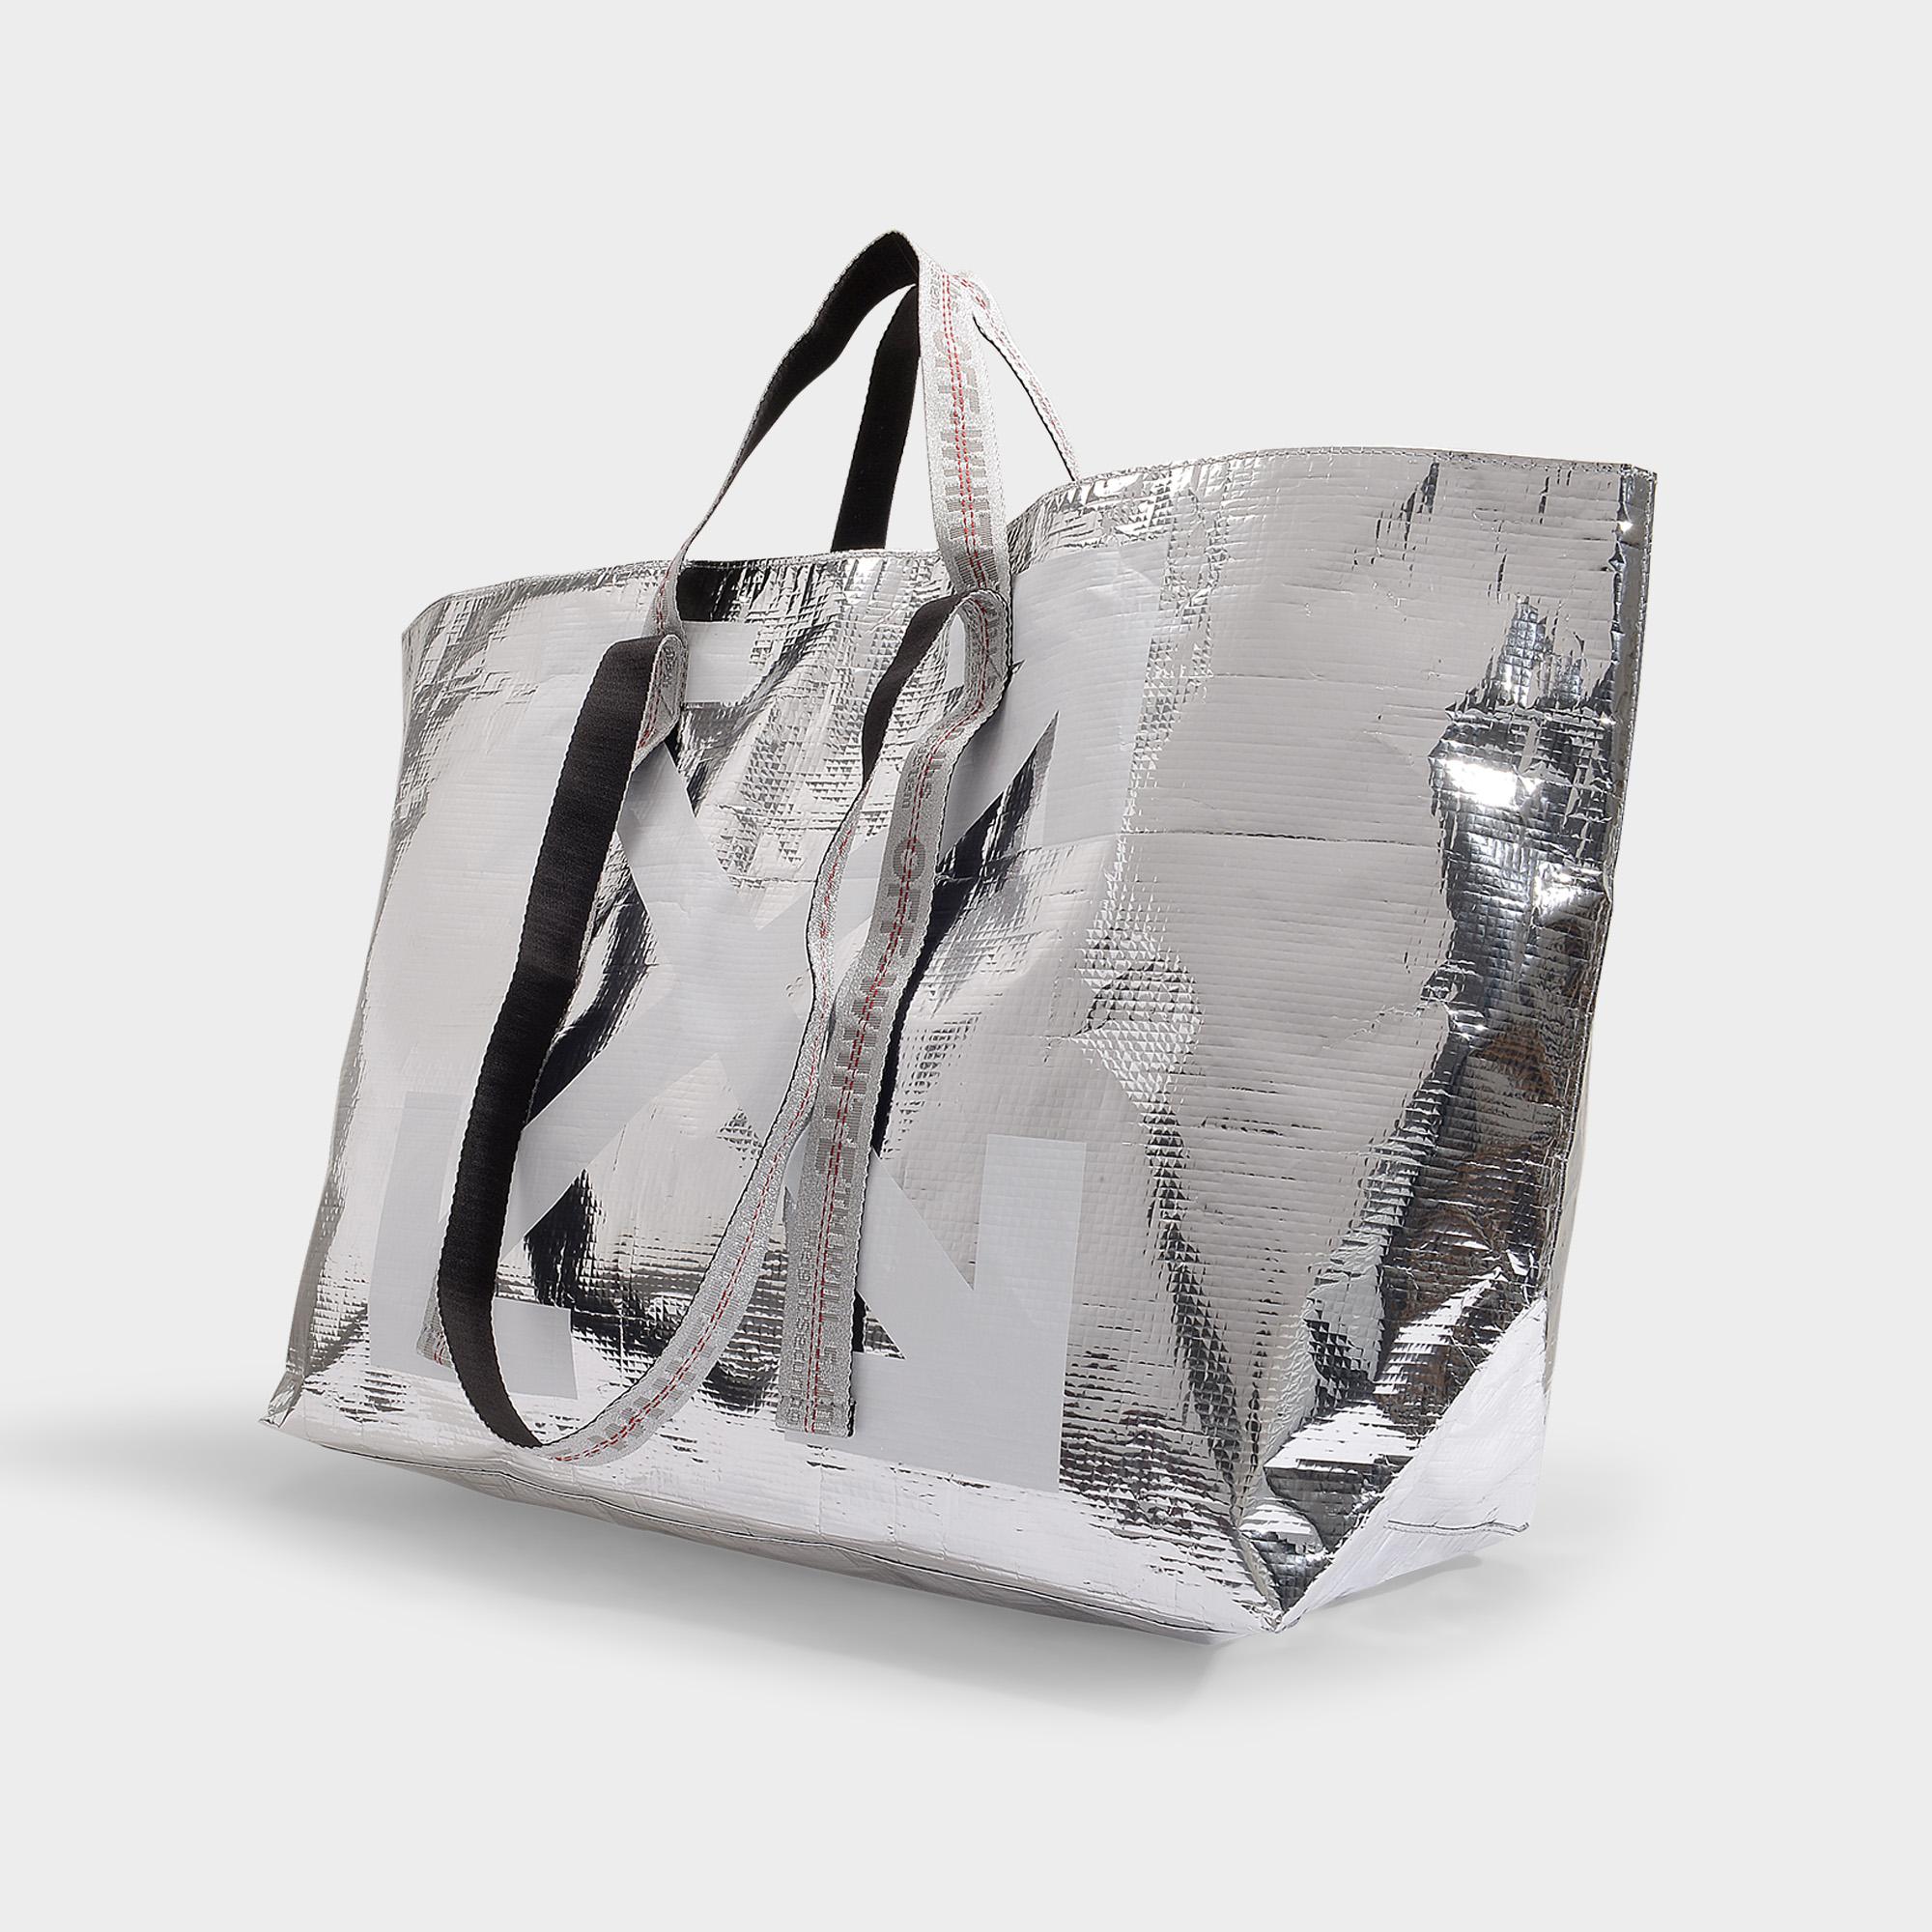 OFF-WHITE Arrows Tote Bag Black White in Polyethylene with Silver